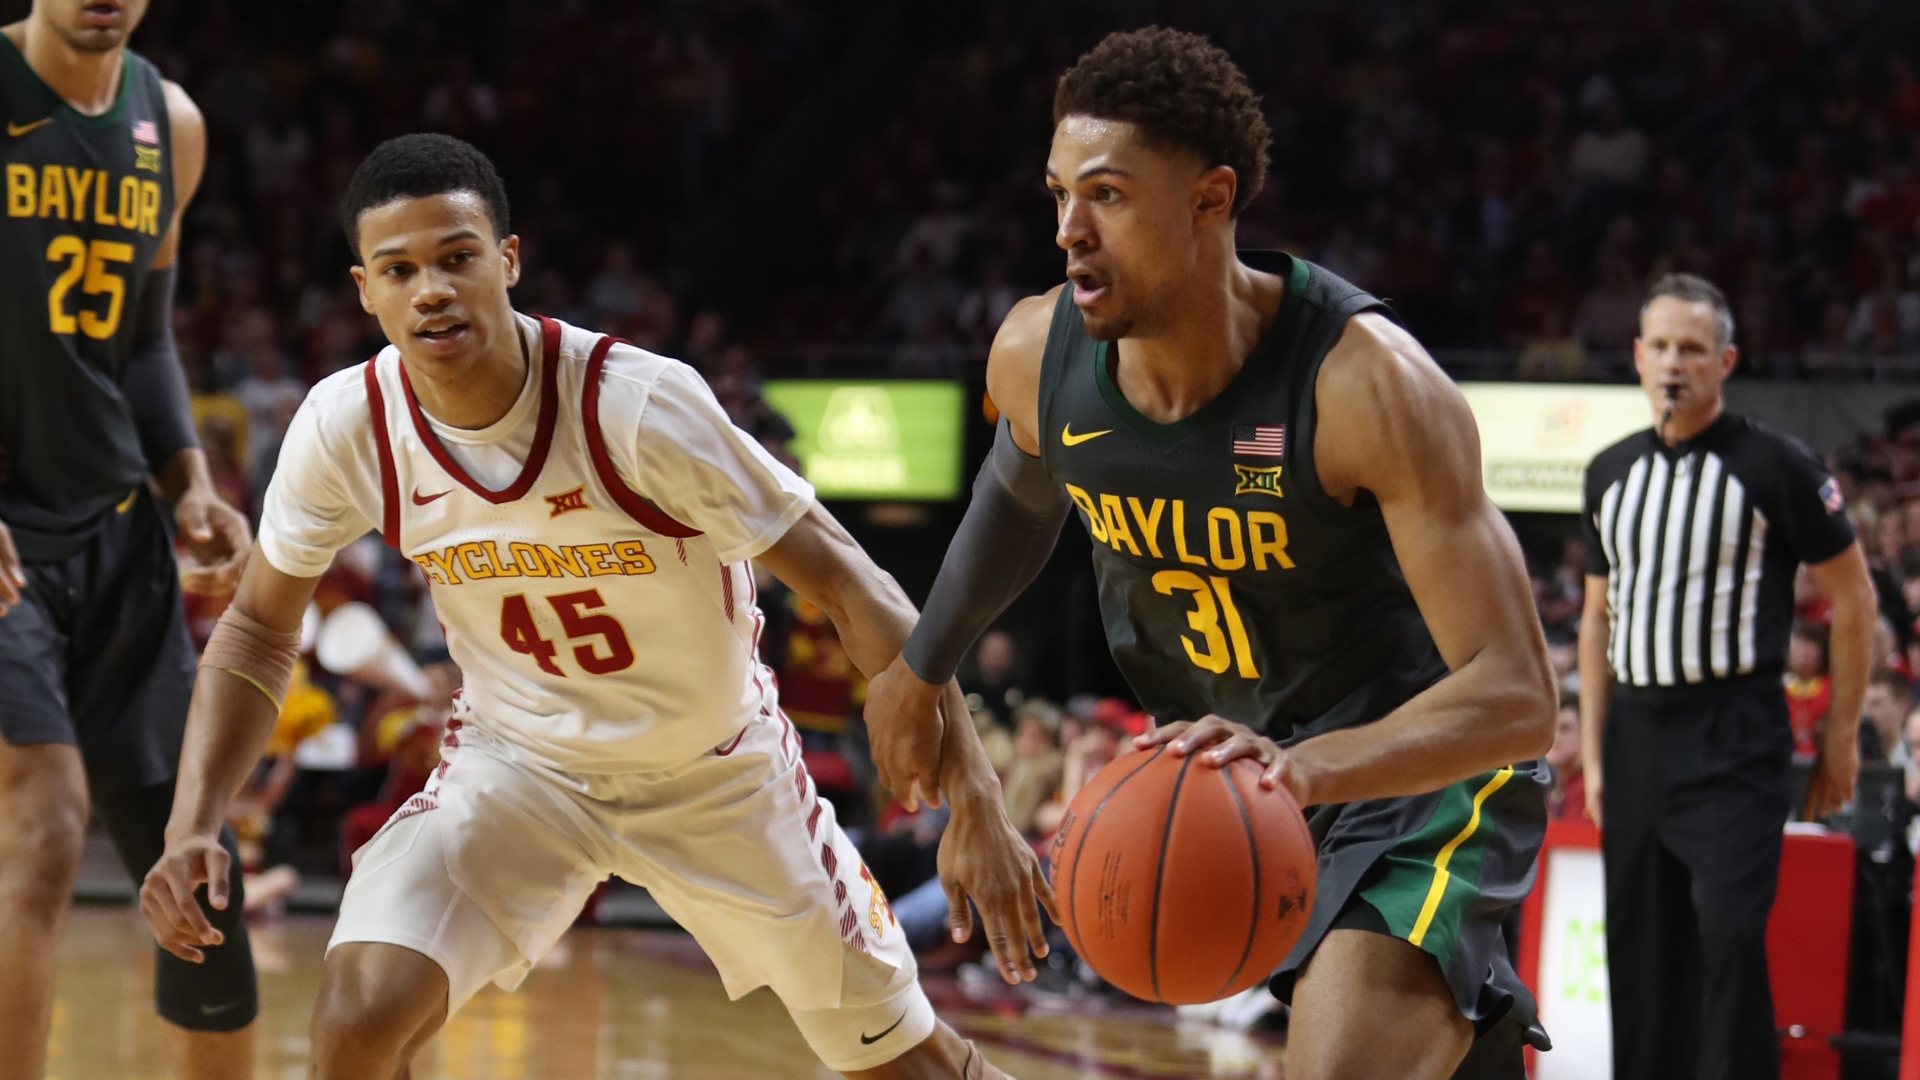 No. 1 Baylor improves to 7-0 in Big 12 play